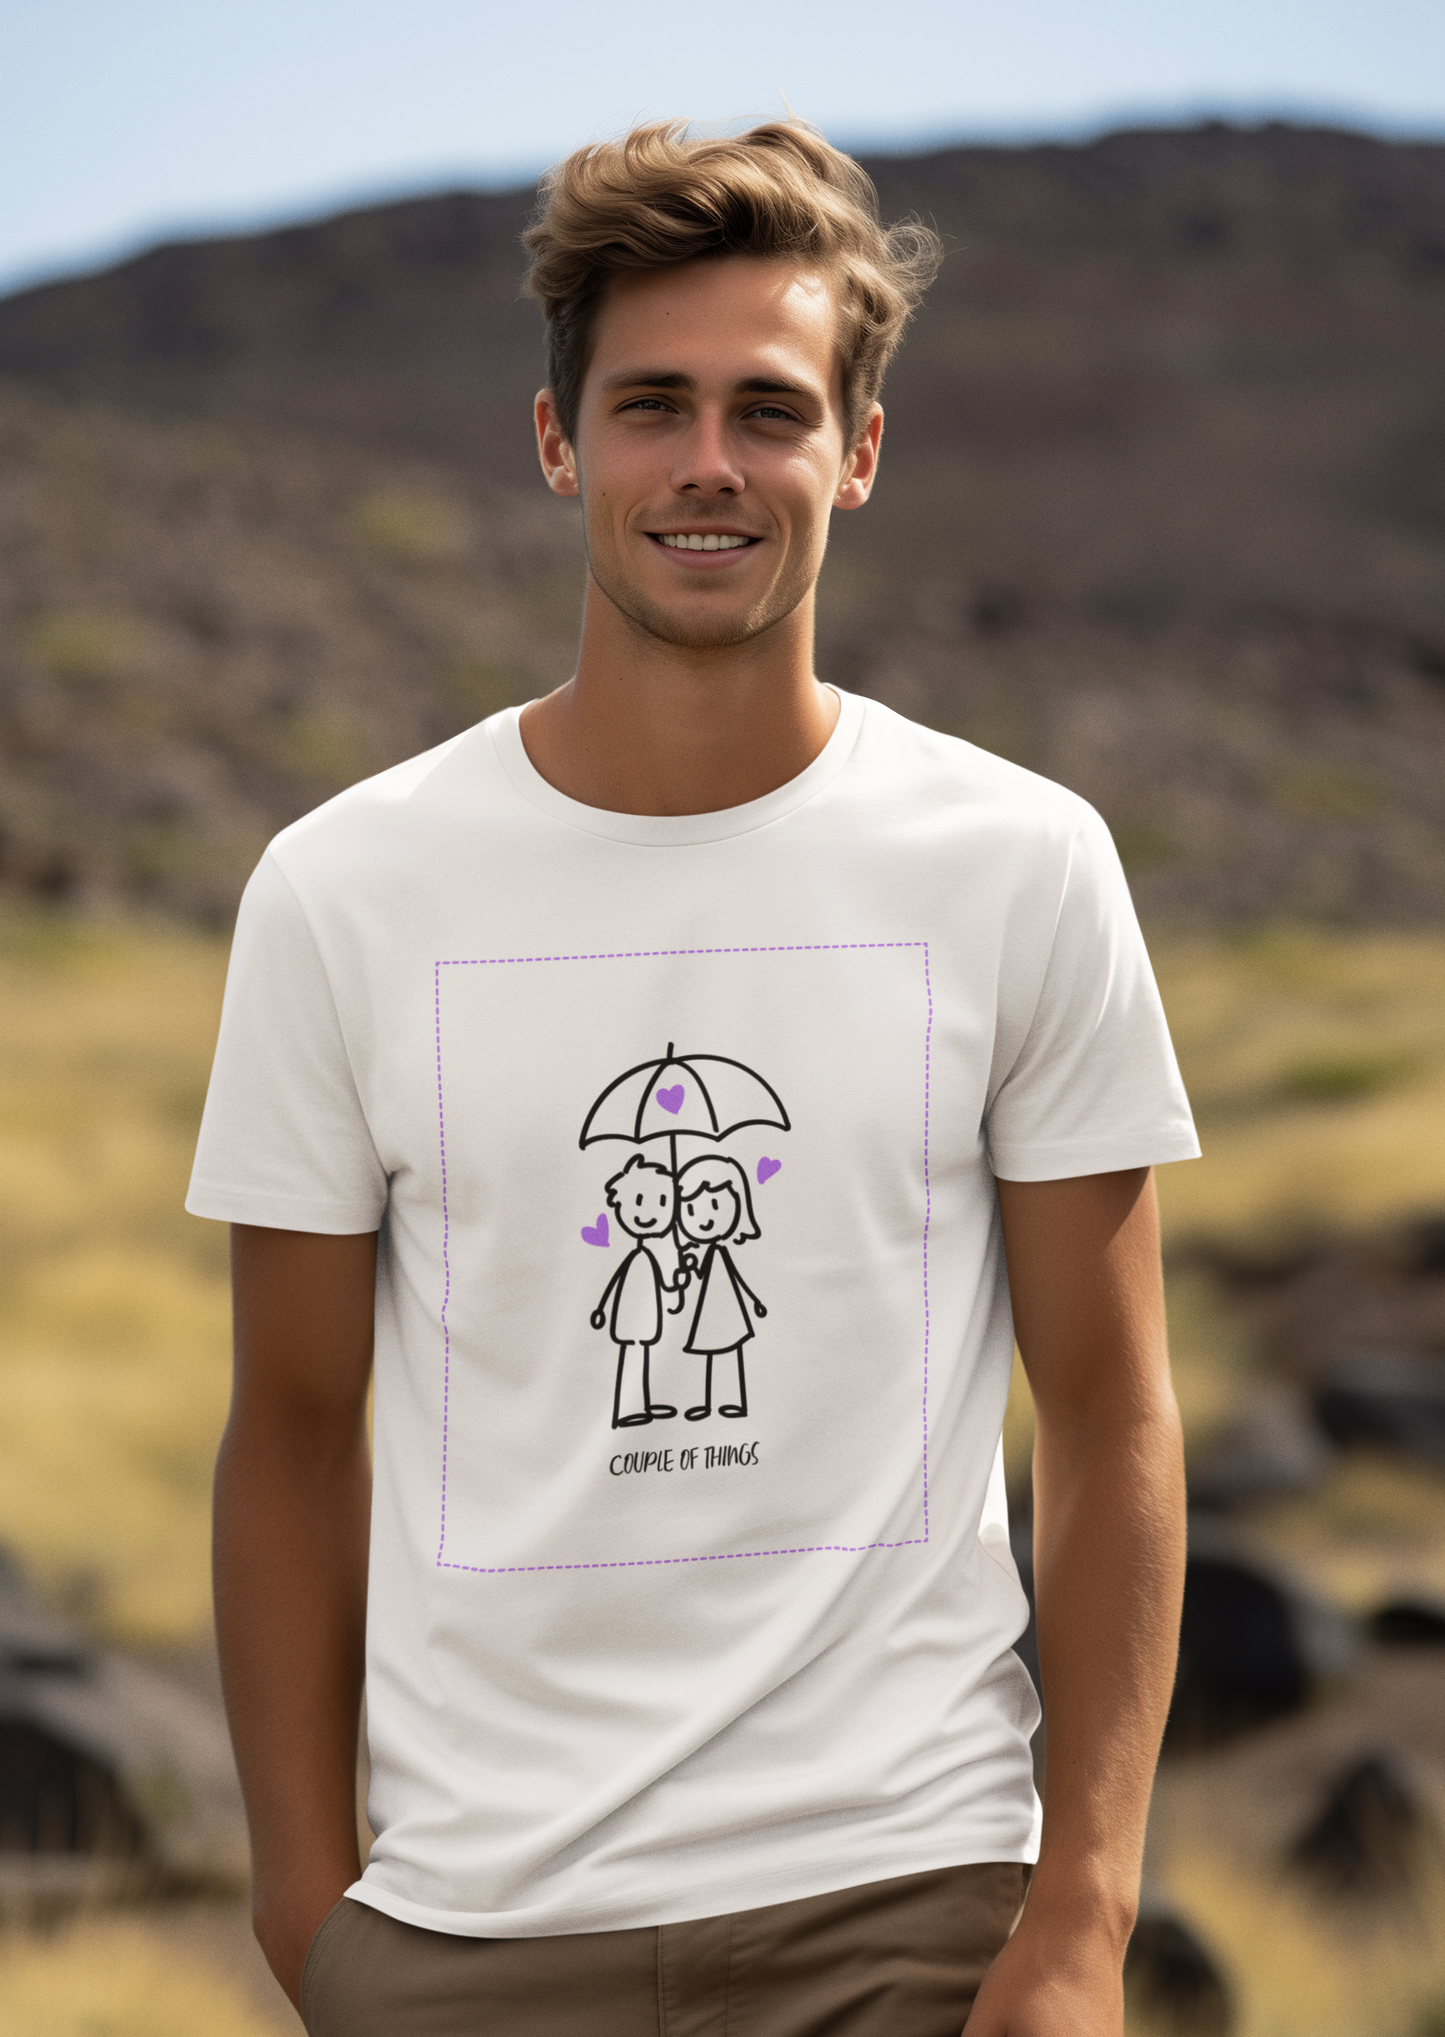 Couple Of Things Illustration White Round Neck T-Shirt For Men | RJ Anmol Collection